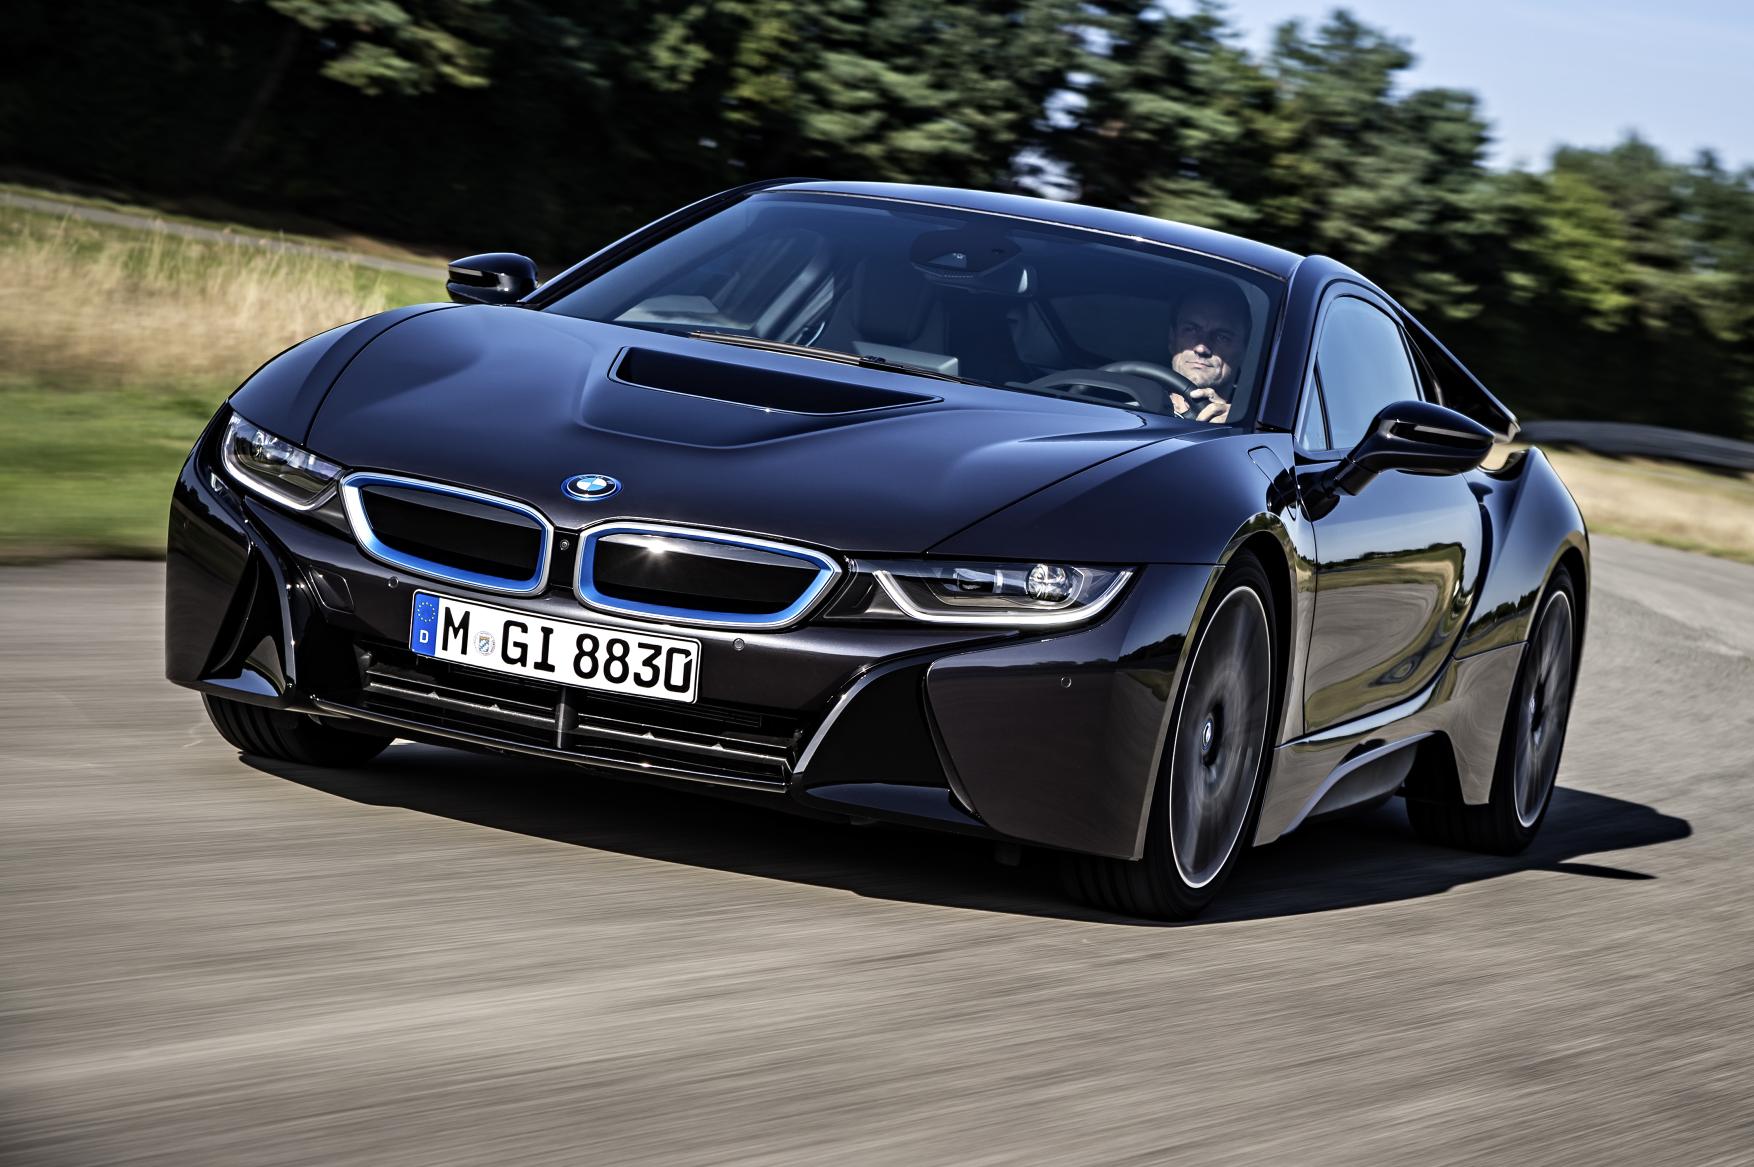 BMW i8, M3 & M4 to make driving debut at Goodwood